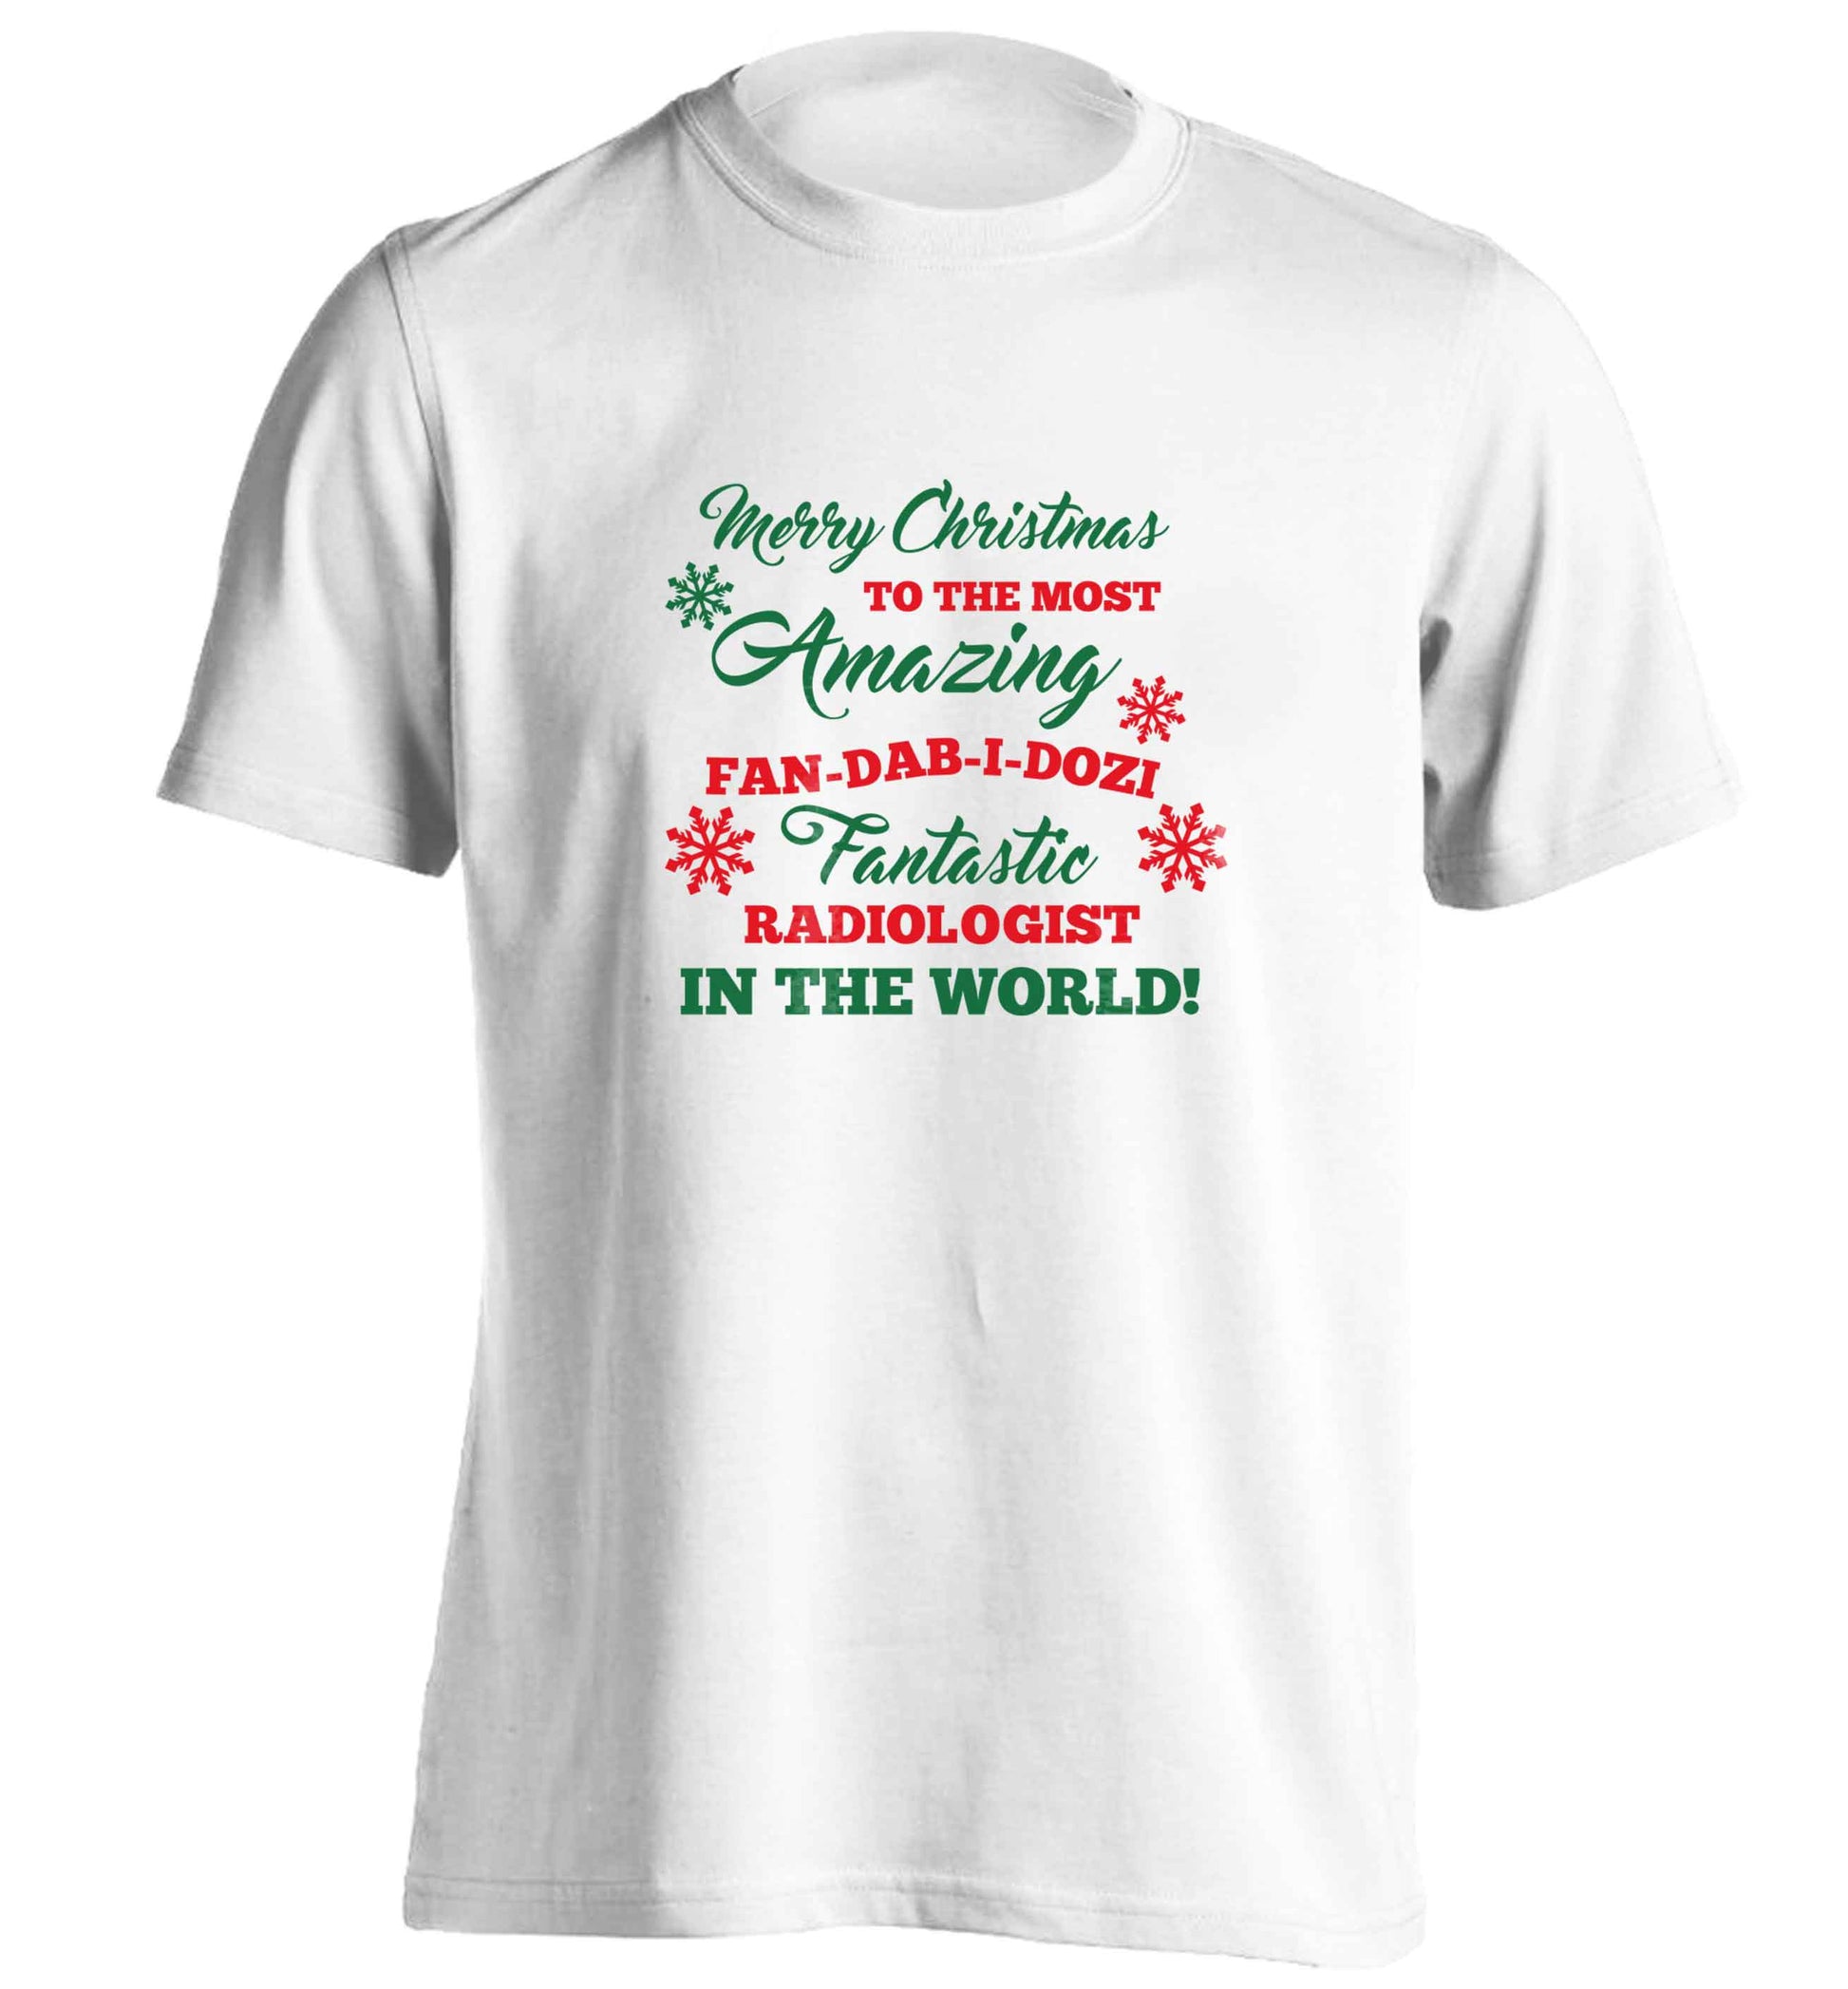 Merry Christmas to the most amazing radiologist in the world! adults unisex white Tshirt 2XL